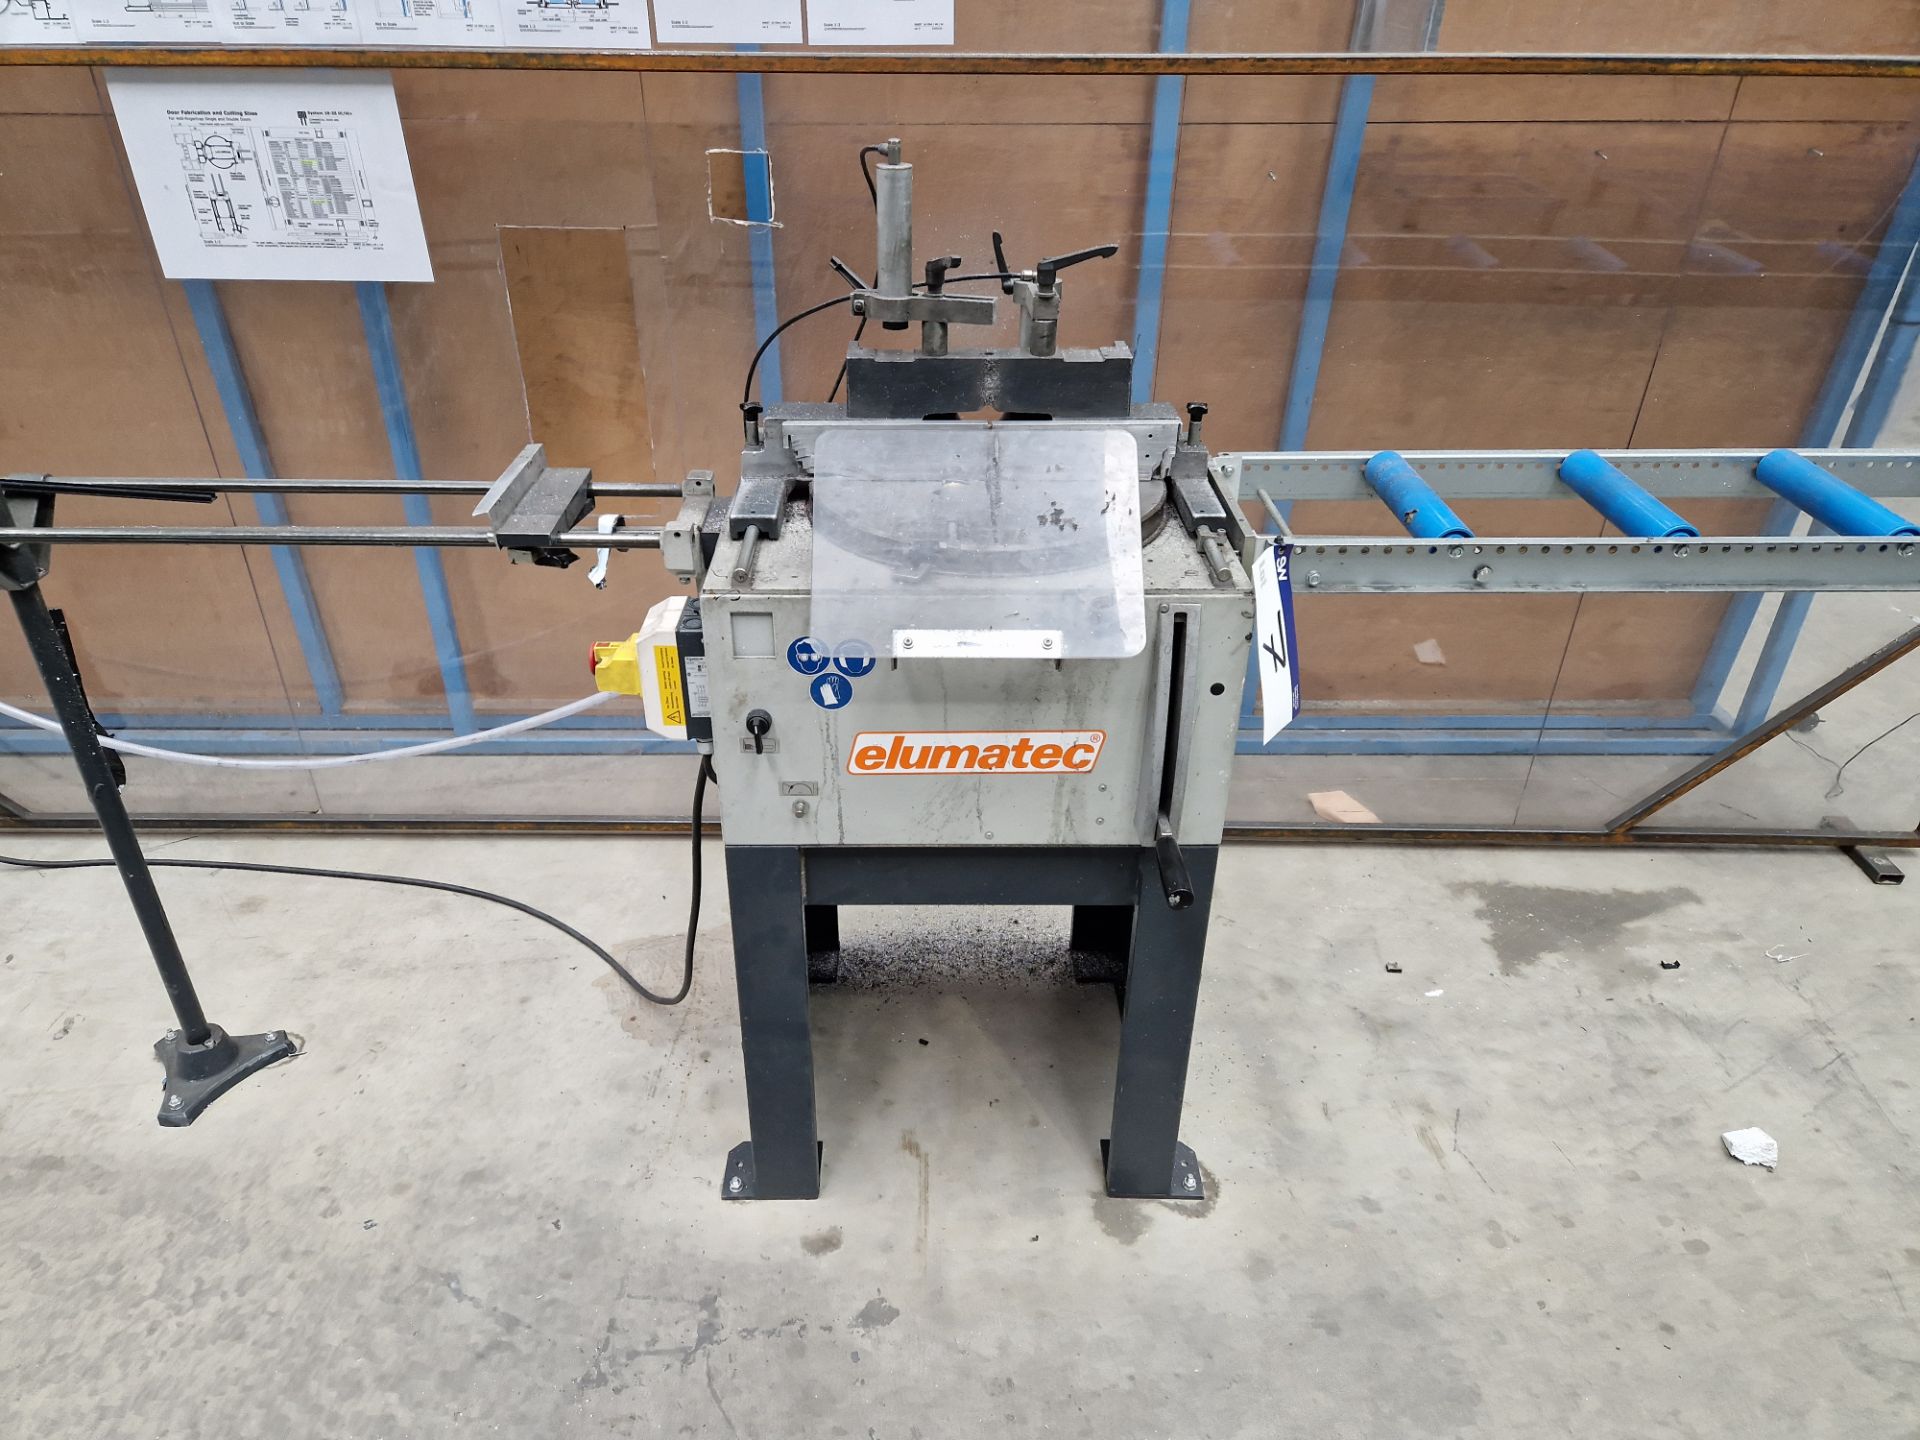 elumatec TS161/21 Upstroking Saw, Serial No. 1612125055, Year of Manufacture 2013 with 3m Roller - Image 3 of 4